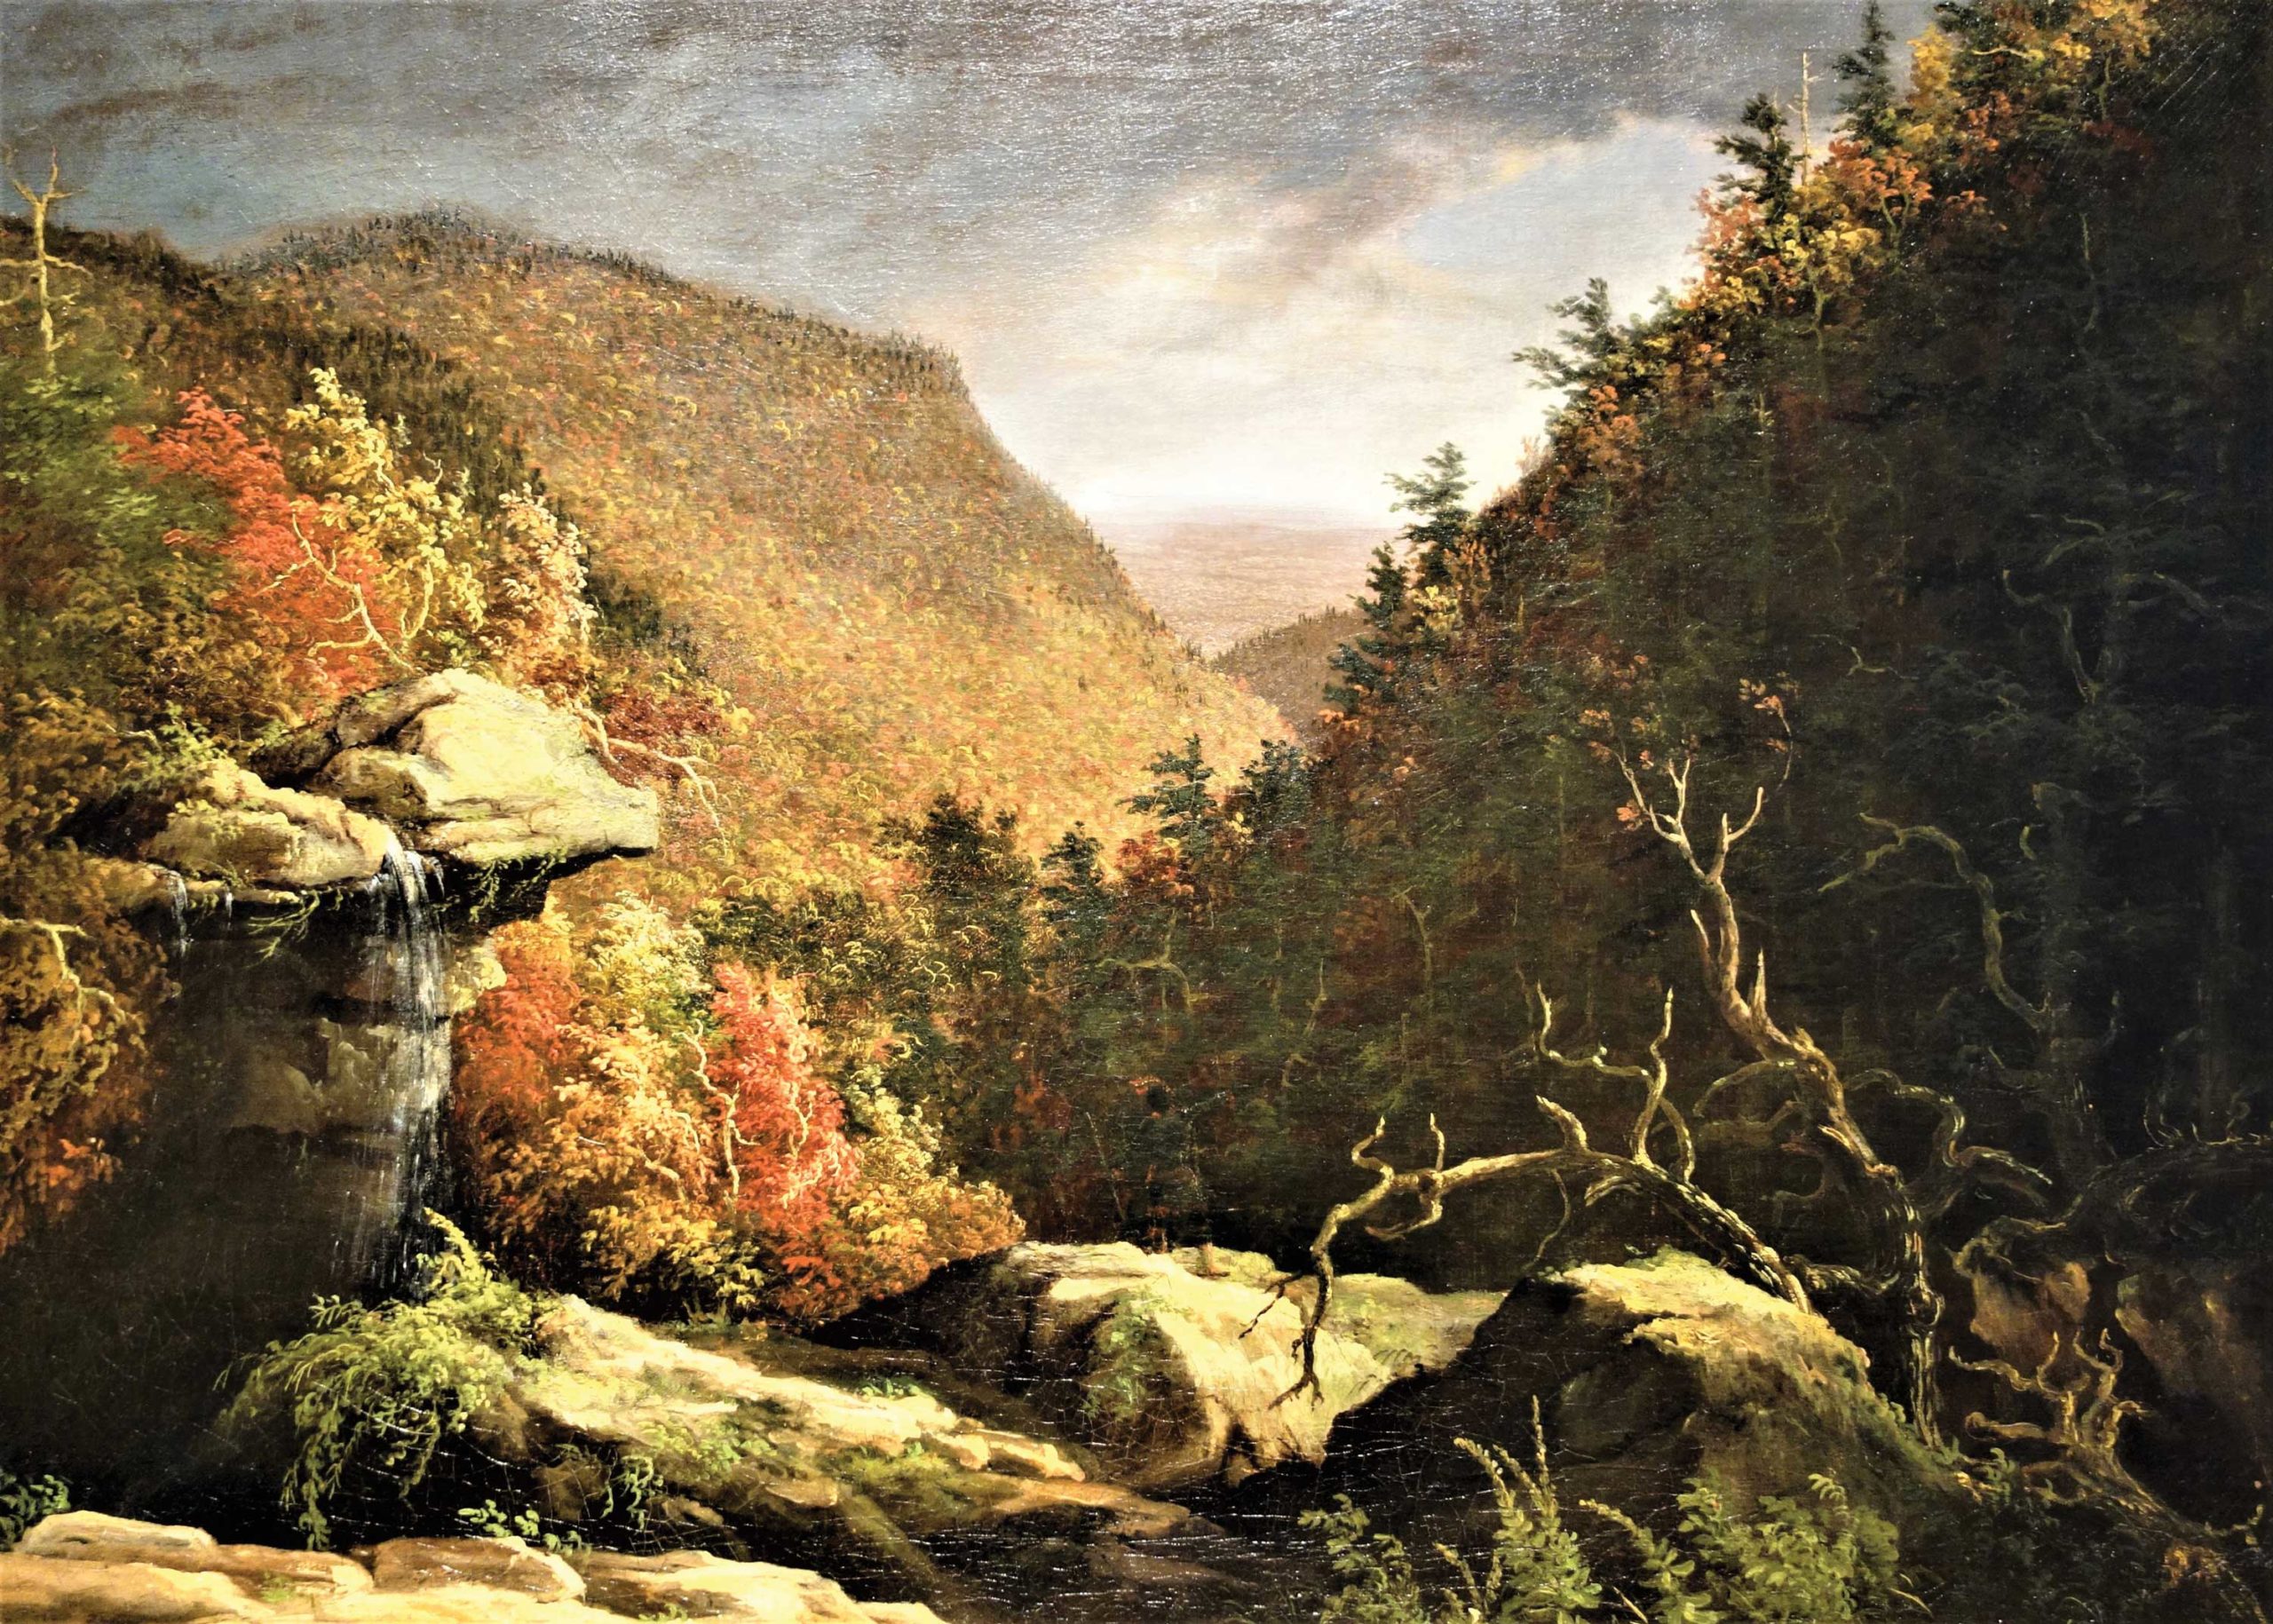 Fig. 9: THOMAS COLE, "The Clove, Catskills," 1827, 25 1/4 x 35 in., New Britain Museum of American Art, Connecticut